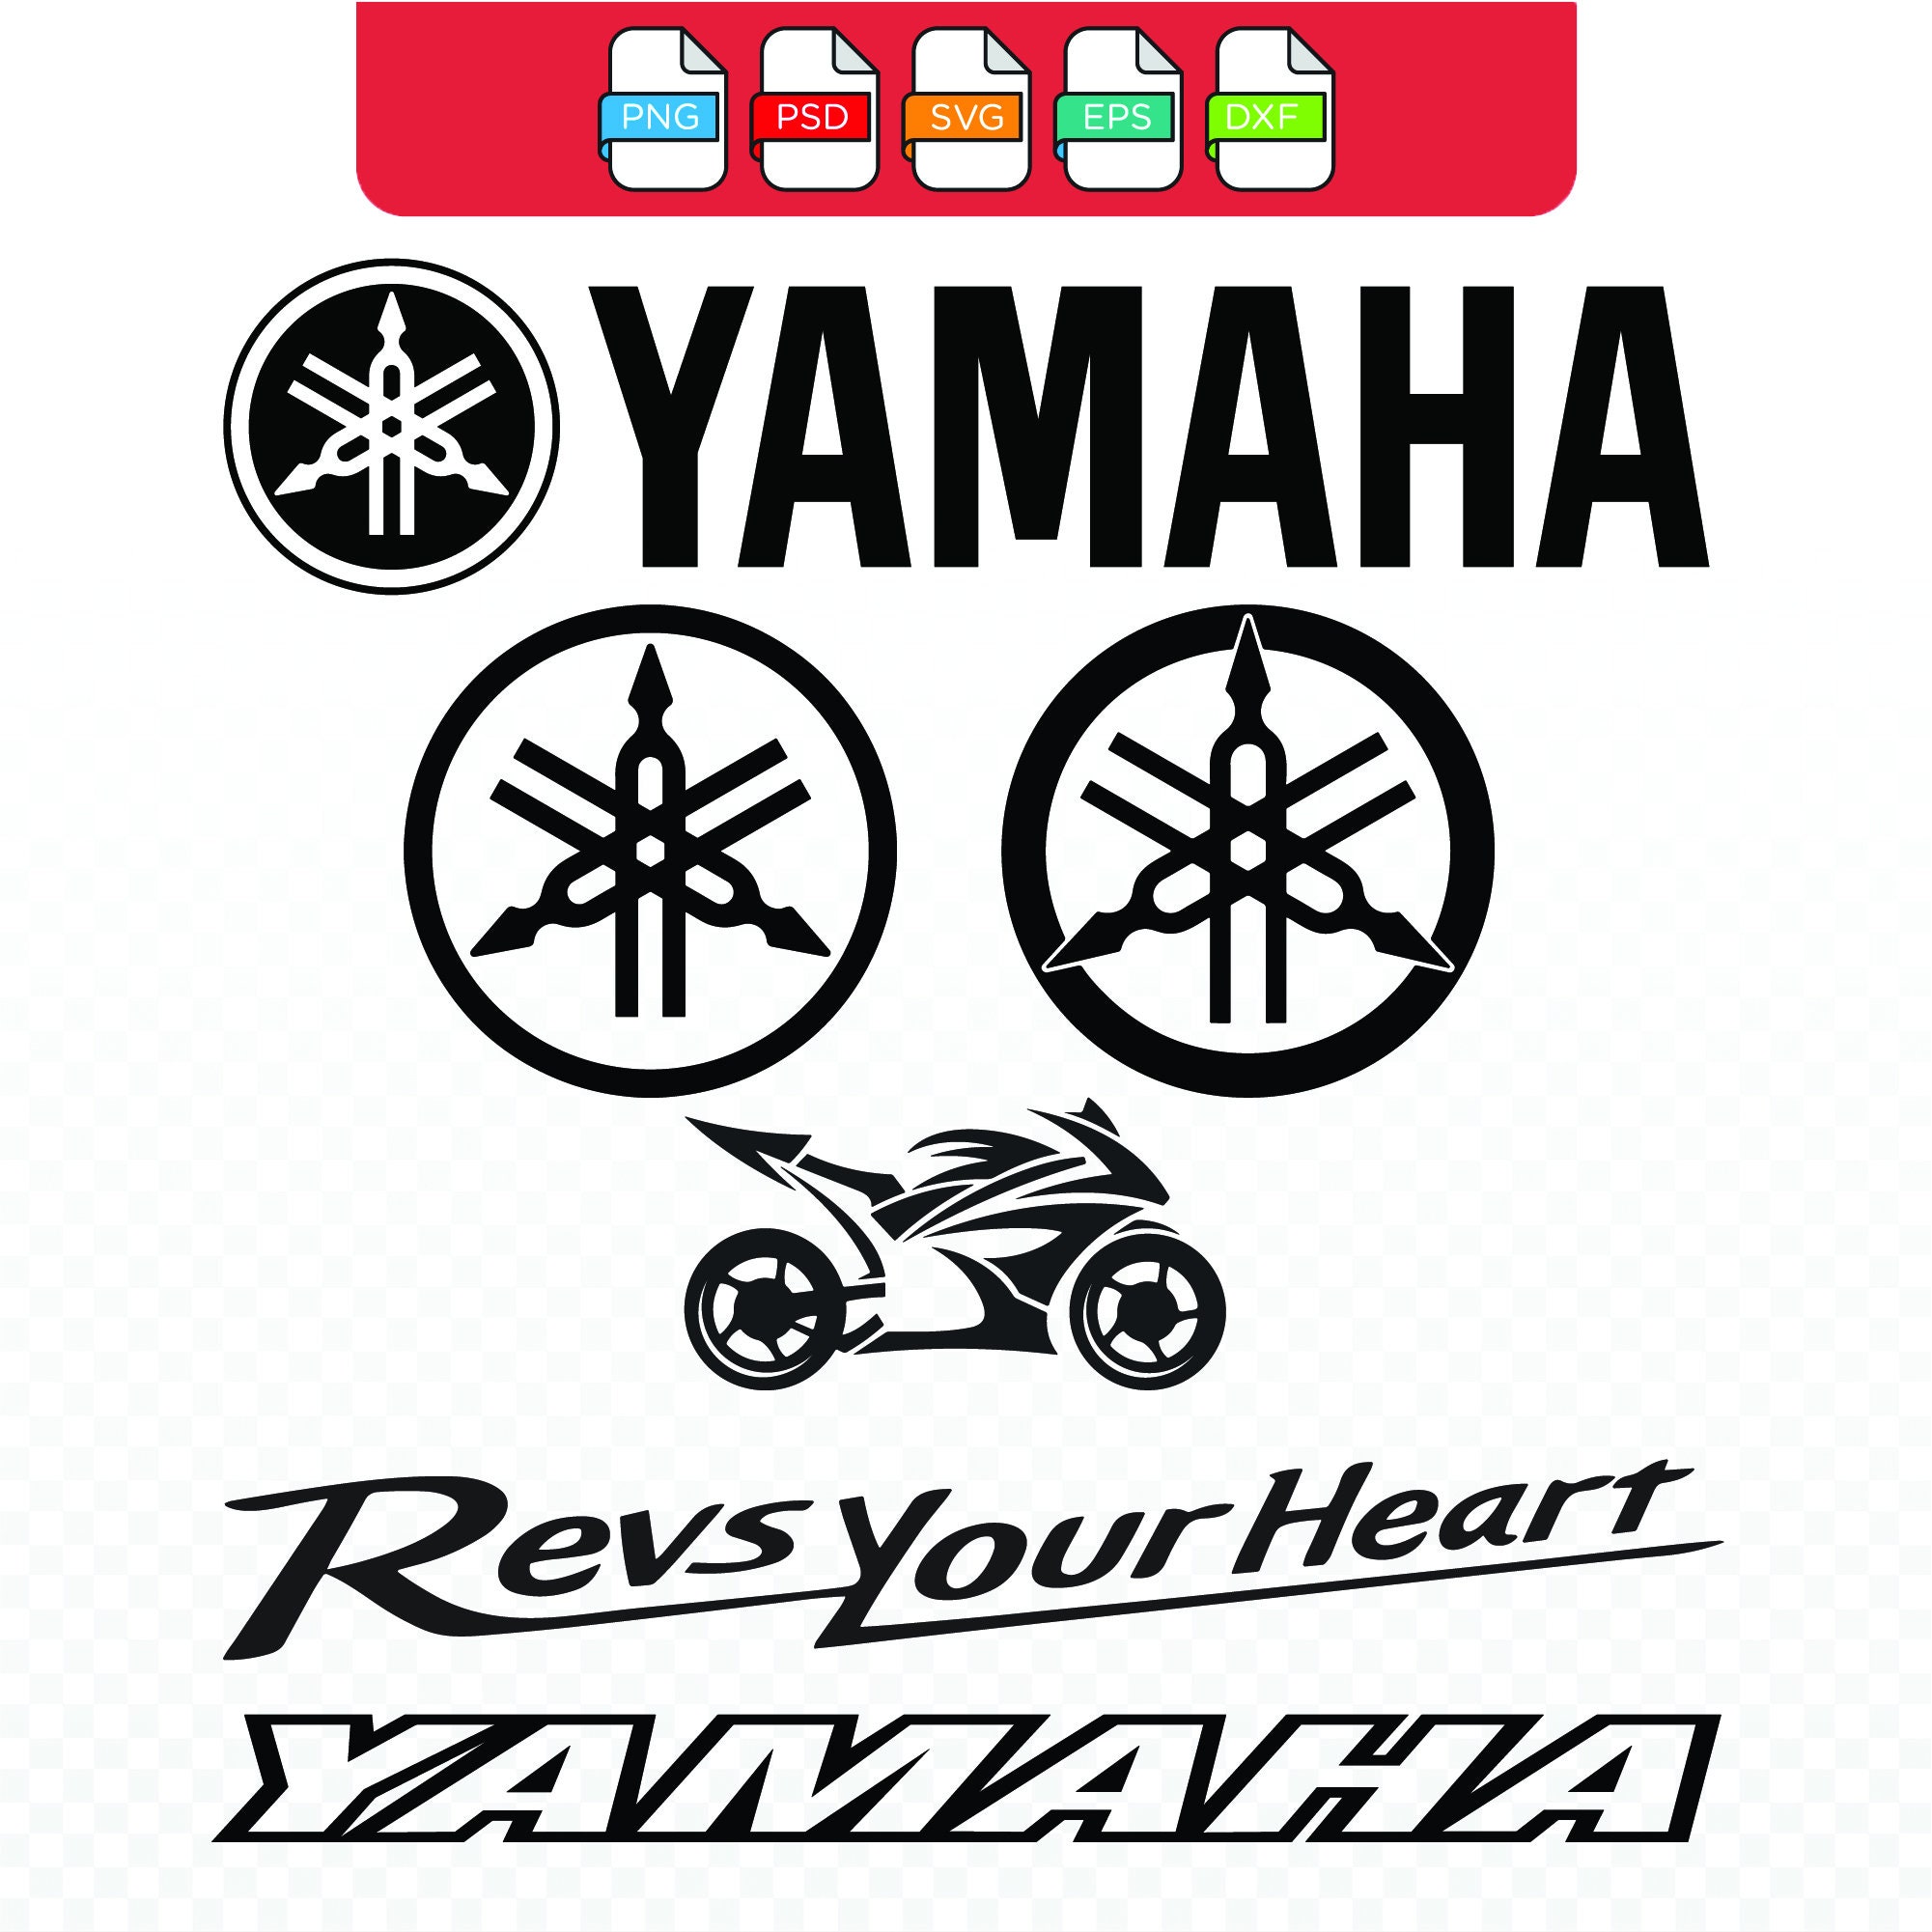 Yamaha SVG/PNG/DXF Cricut, Silhouette, Sublimation, Decal